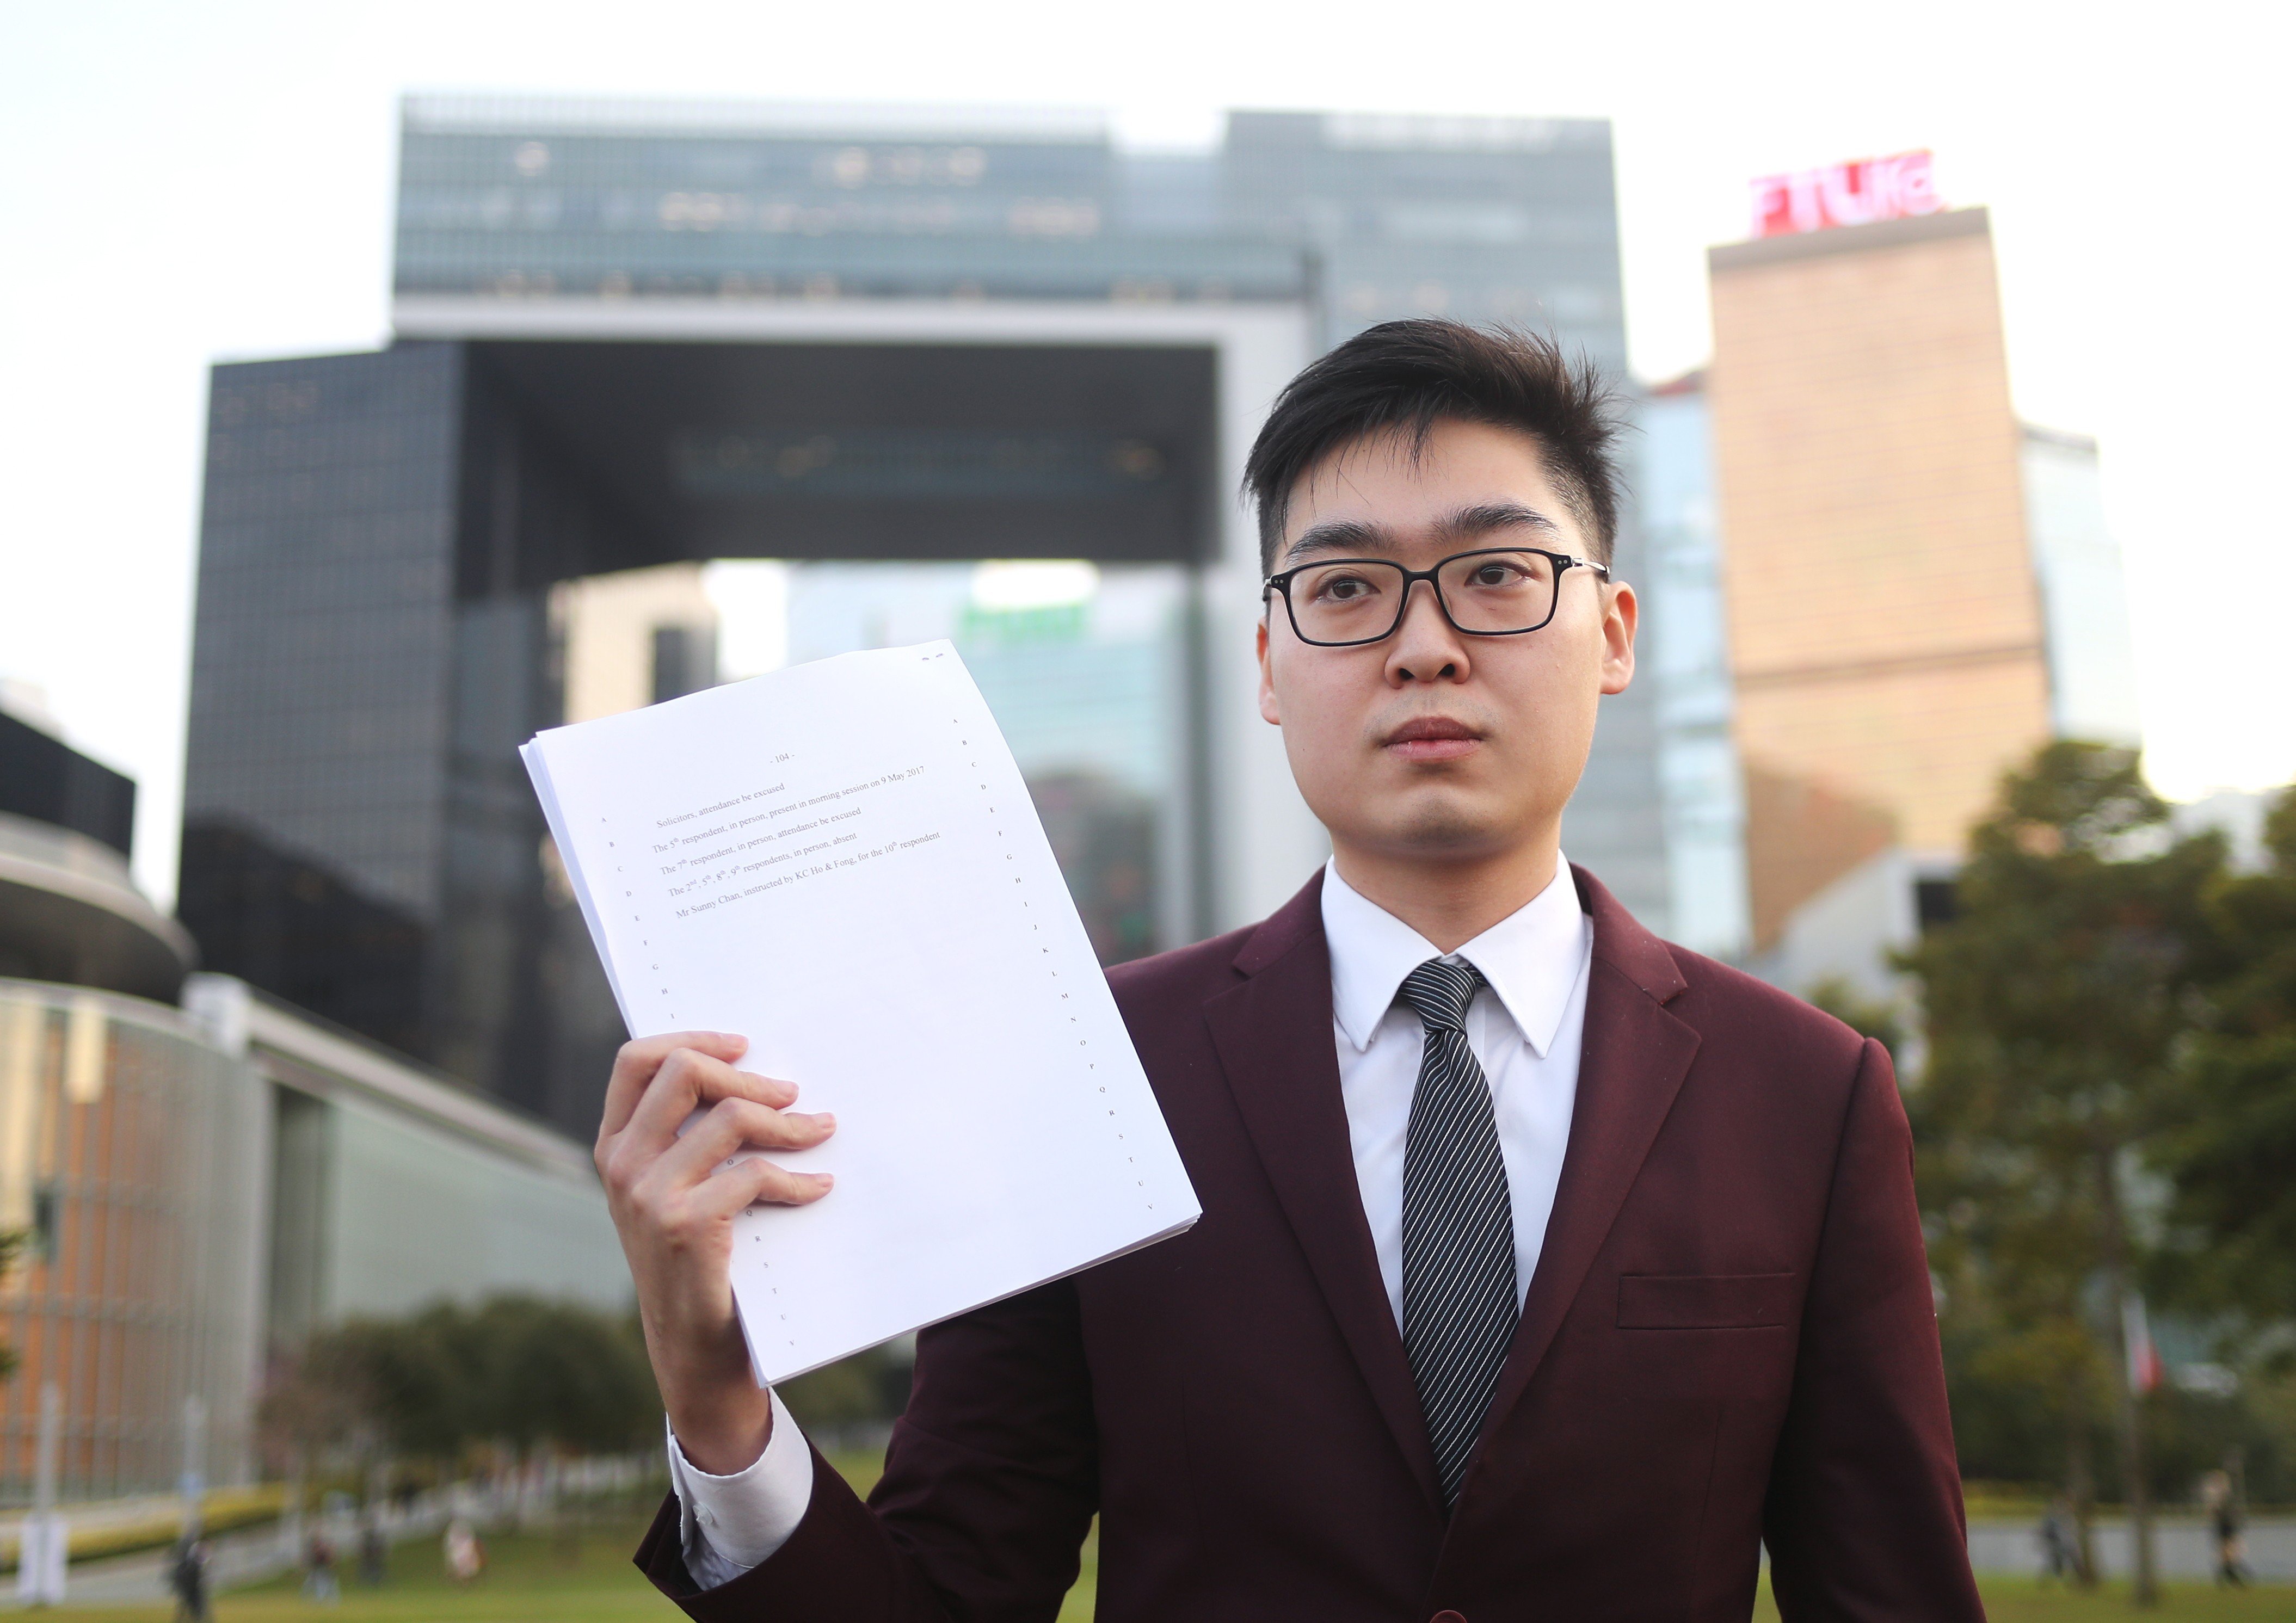 Convenor of the Hong Kong National Party Andy Chan Ho-tin, was among several aspirants banned from the 2016 Legco election. Court ruled against Chan on Tuesday, determining that election officials can ban candidates for their political views when given evidence they would not uphold the Basic Law. Photo: Winson Wong